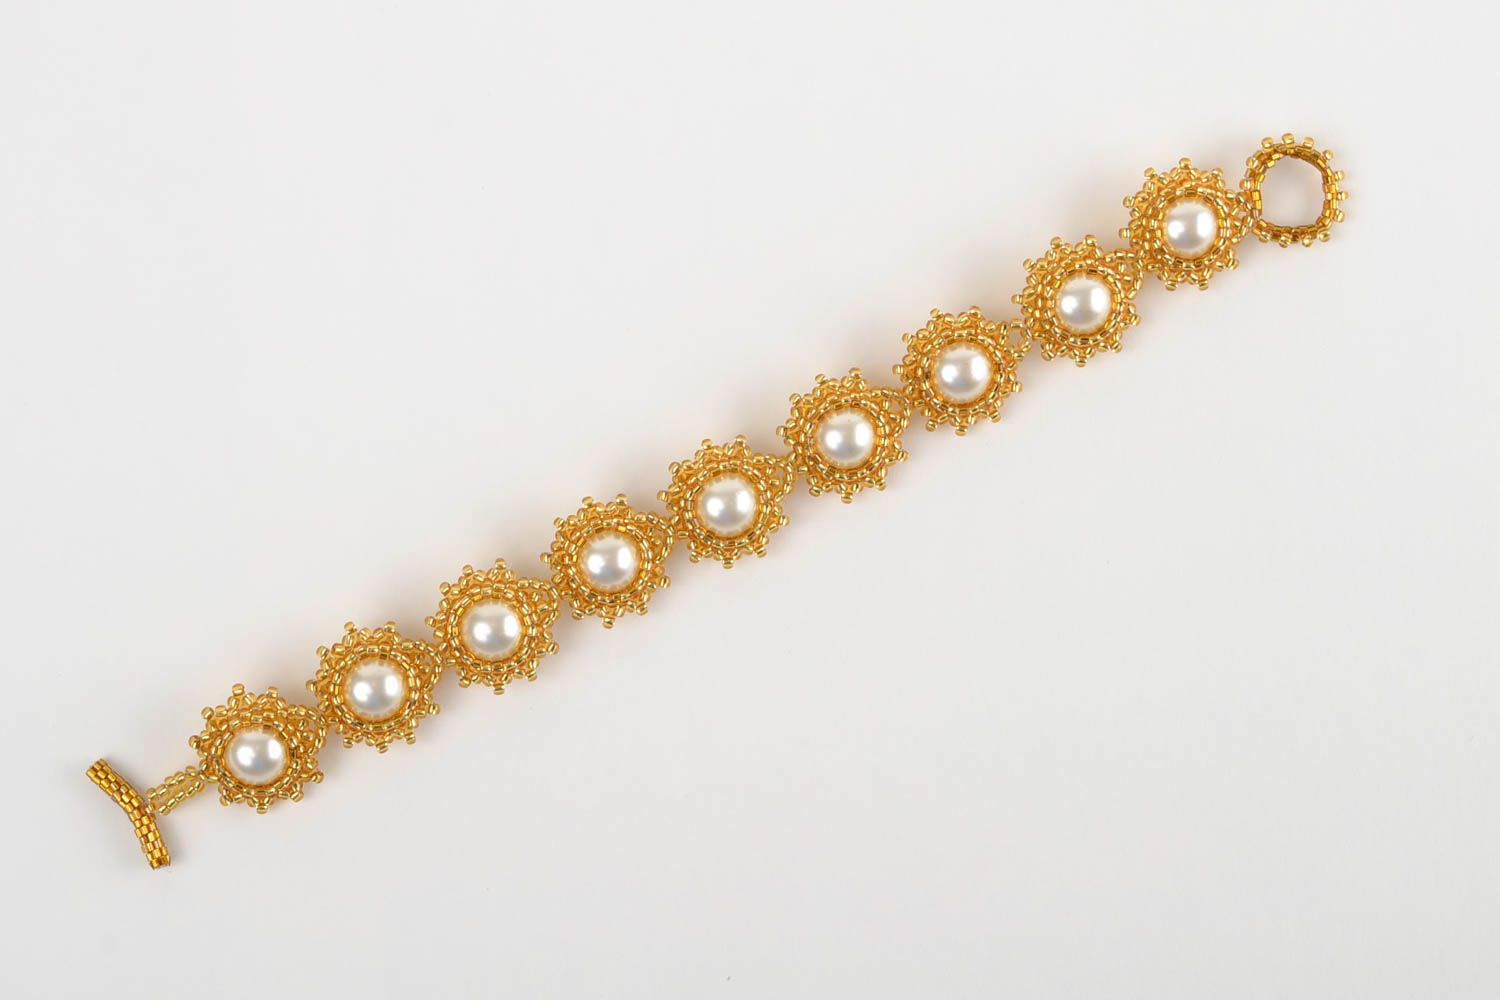 Beaded bracelet in the shape of flowers in gold and white colors photo 2